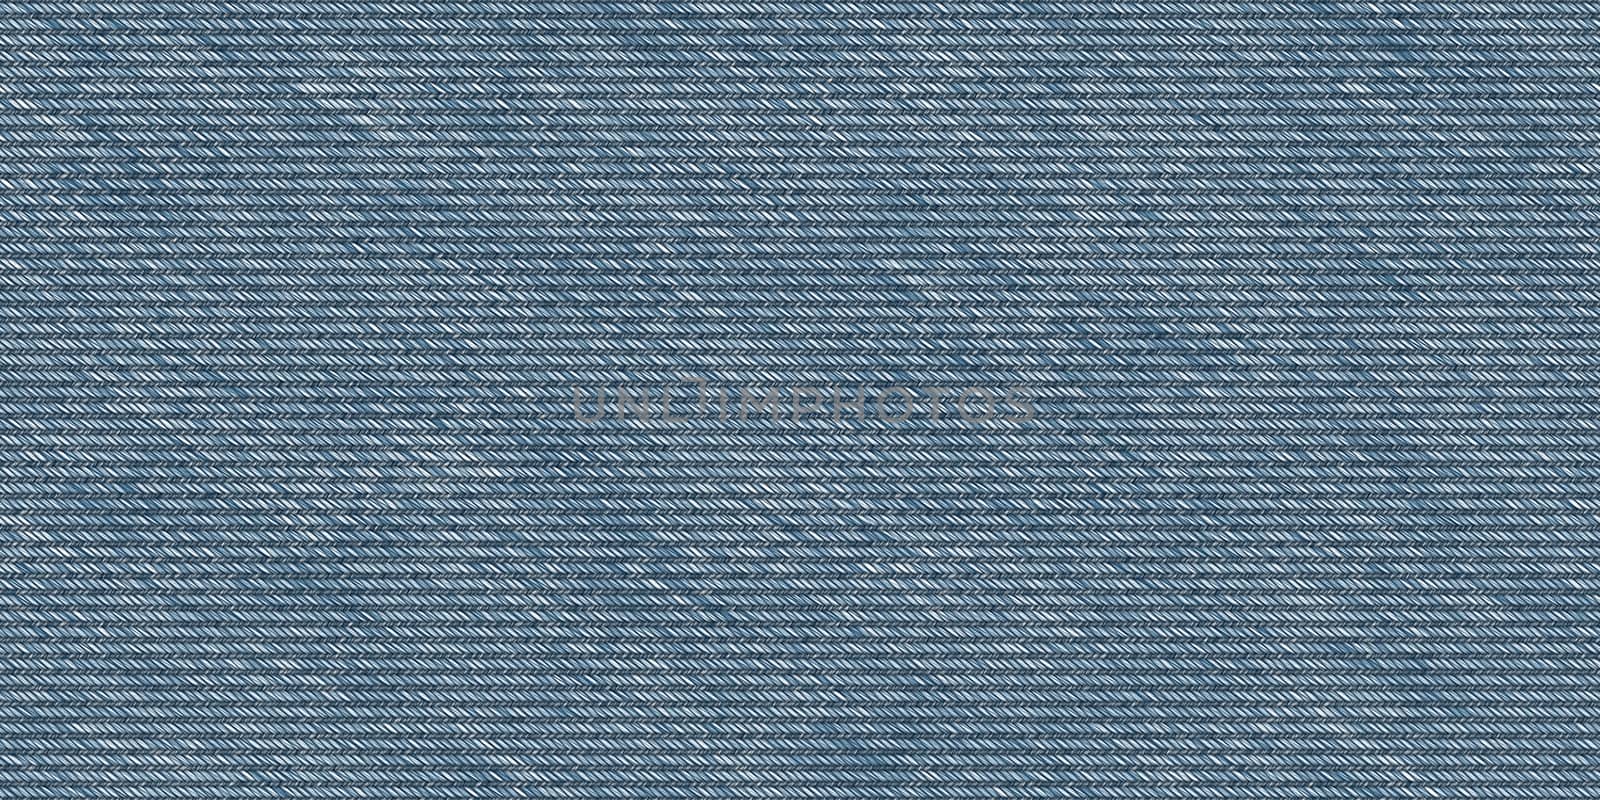 Blue Jeans Denim Seamless Textures. Textile Fabric Background. Jeans Clothing Material Surface. Grunge Wear Pattern.